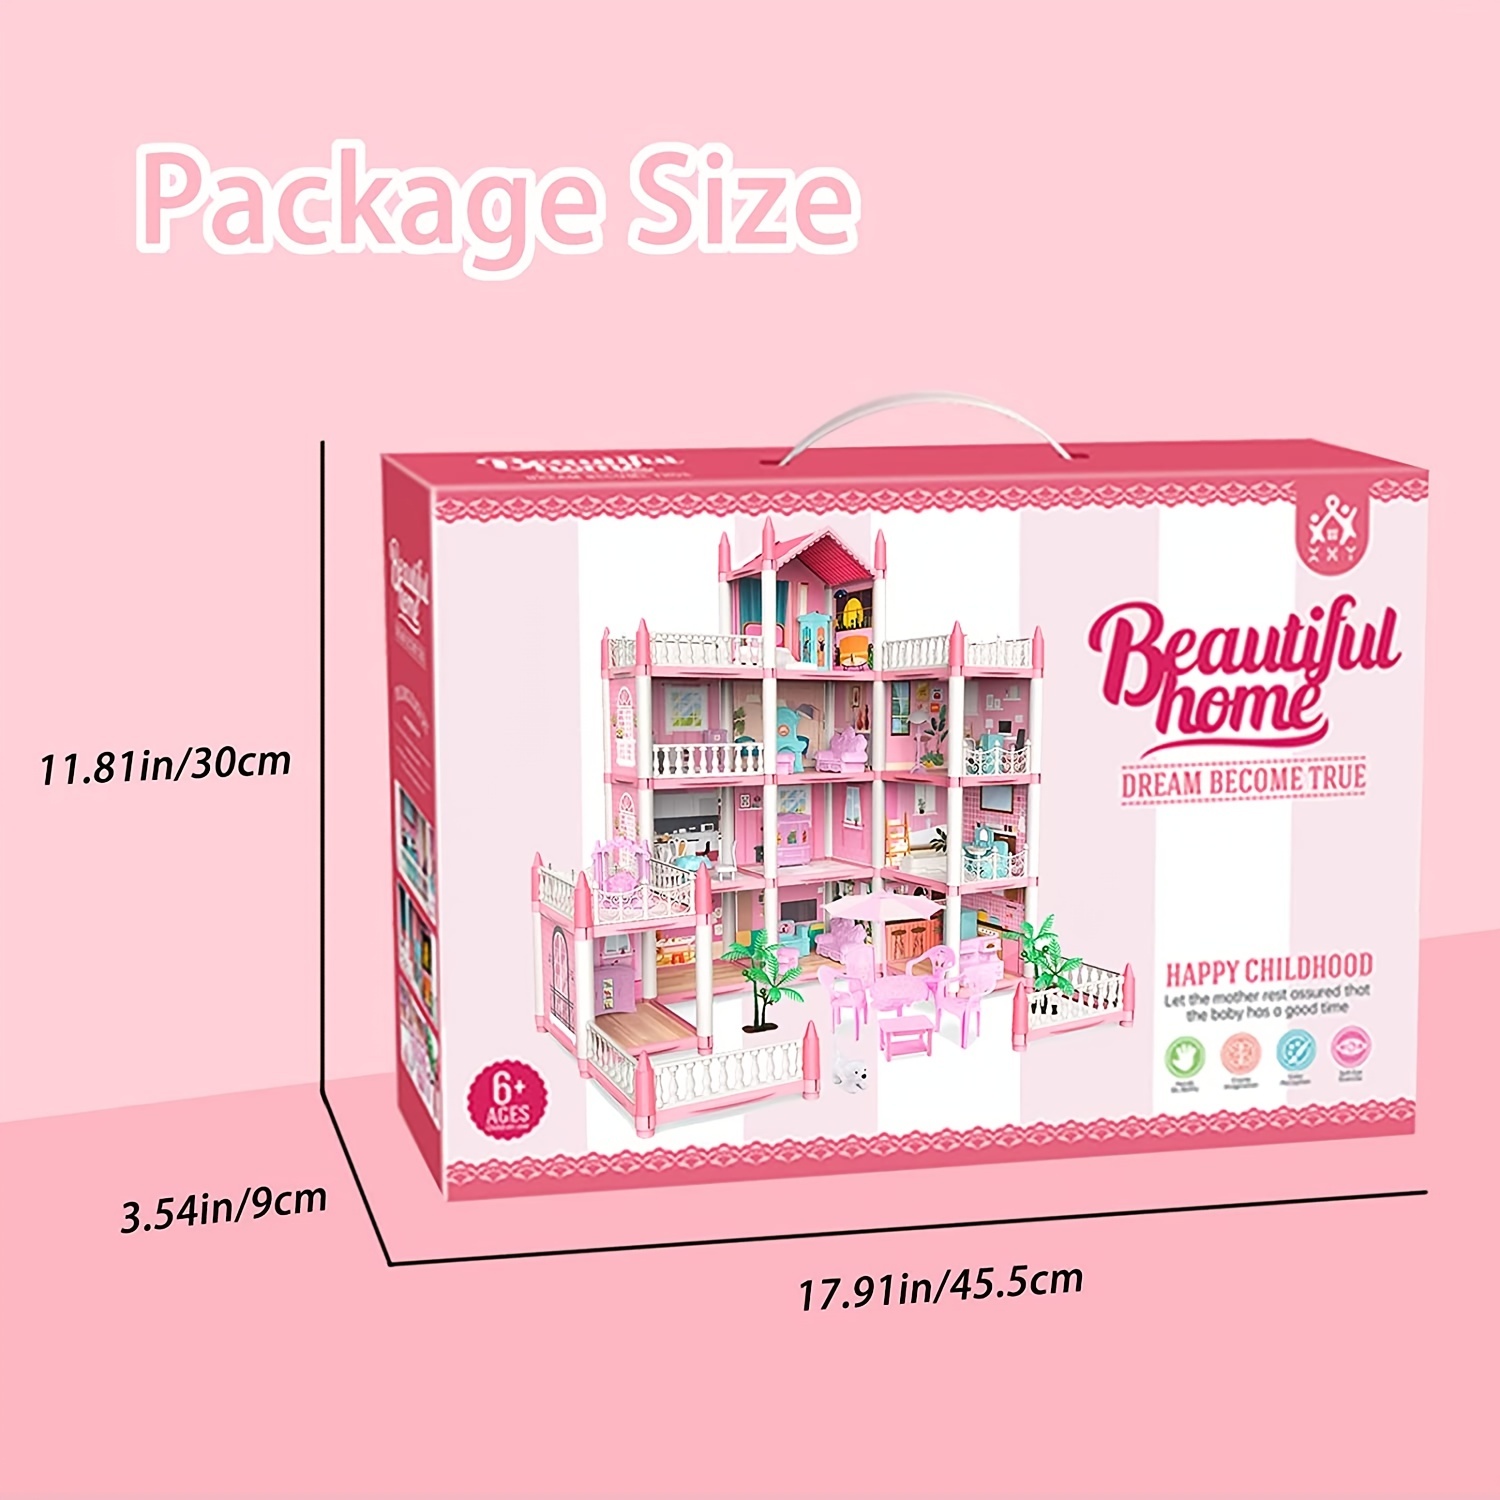 deAO Doll House Dollhouse - 3 Story 9 Rooms Pink DIY Pretend Play Building  Playset, Dollhouse Asseccories and Furniture,Gift for 6 7 8 9 Girls Toddler